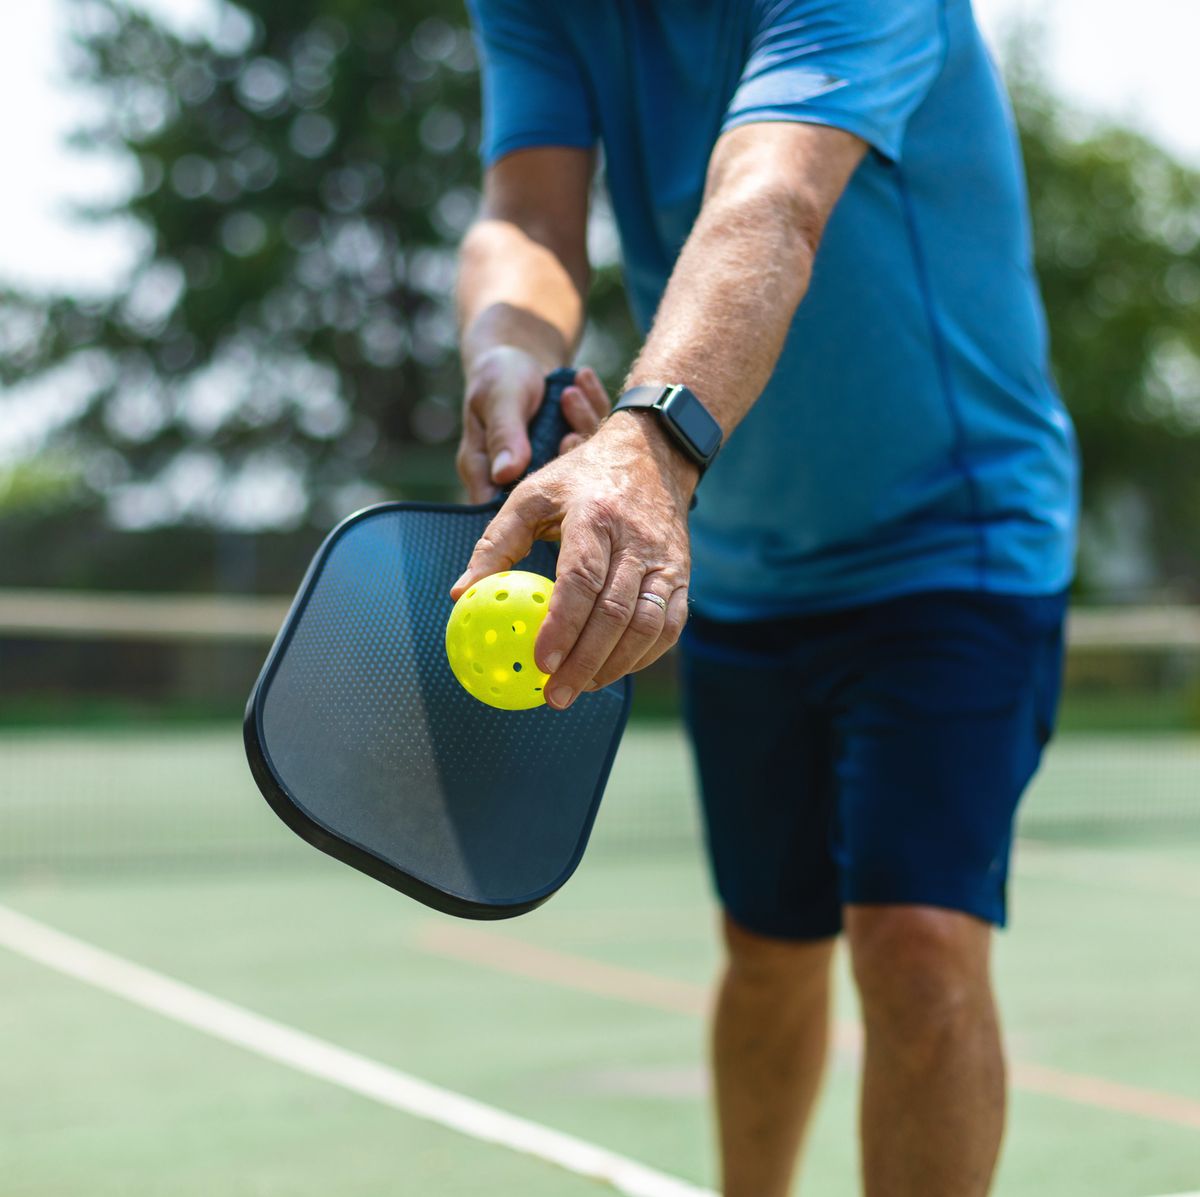 10 Rules of Pickleball: How to Play the Right Way